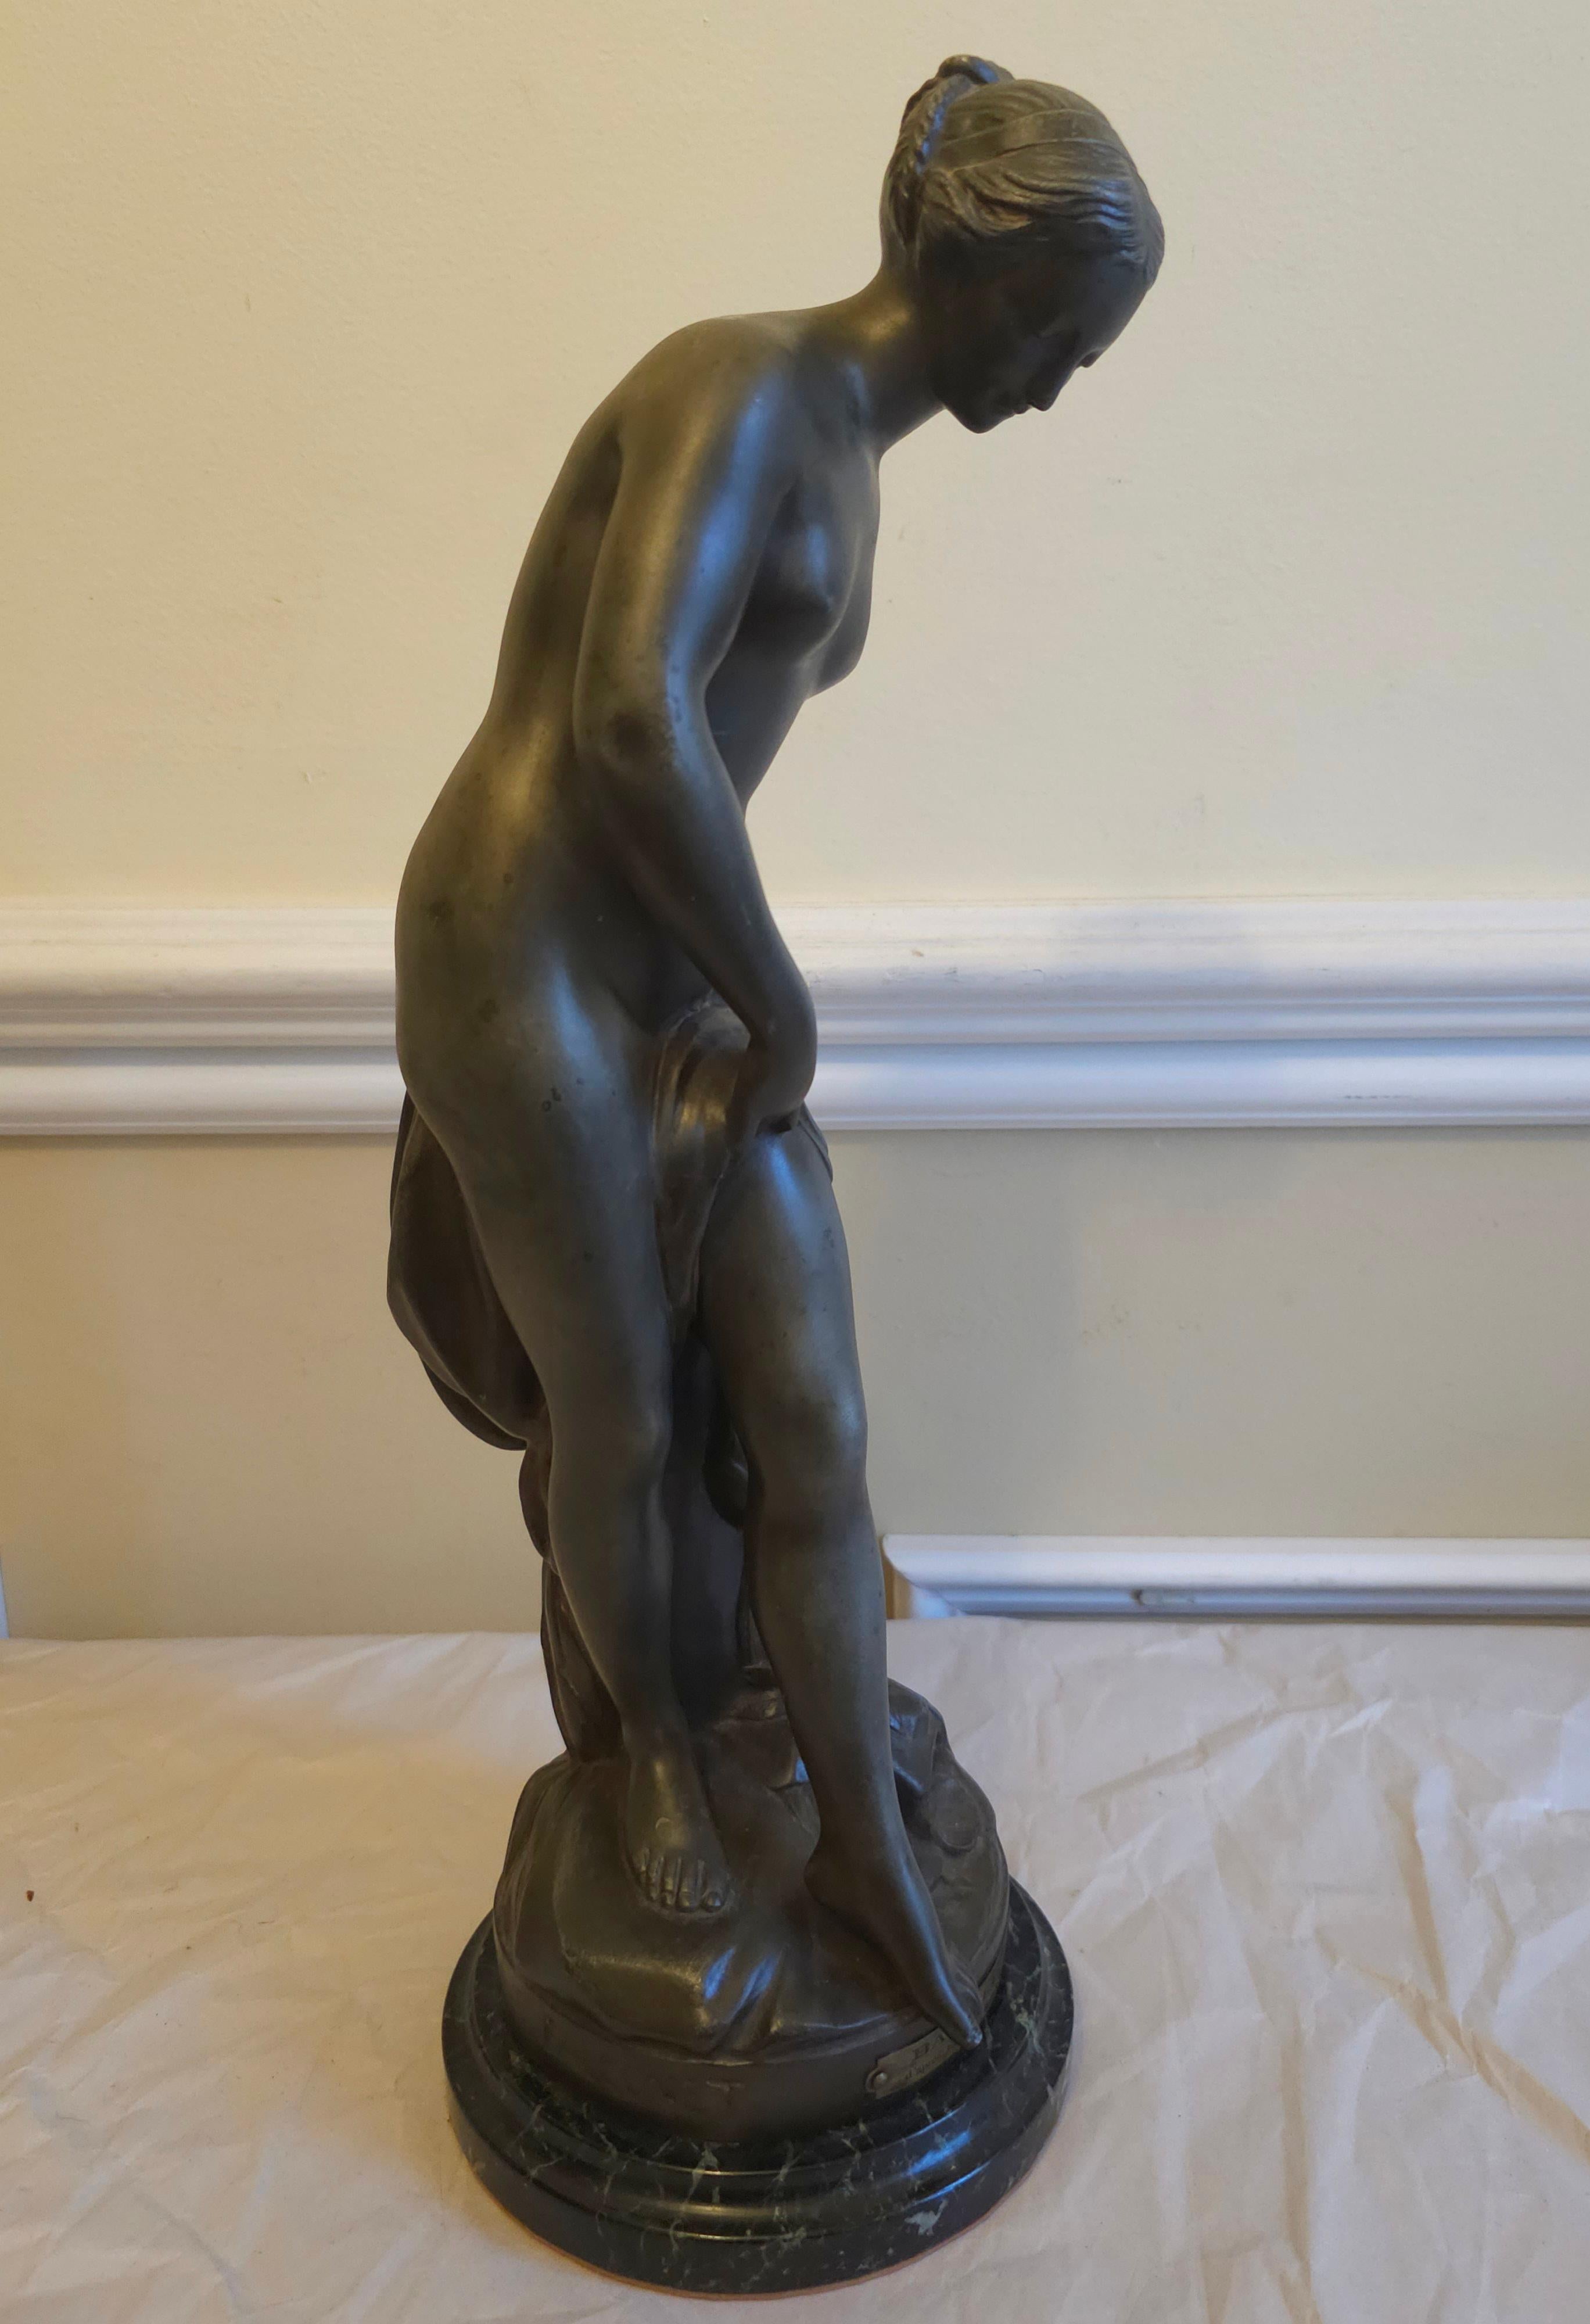 Metalwork Etienne Falconet  1716-1796 La Baigneuse (The Bather) Diana at Well Sculpture   For Sale